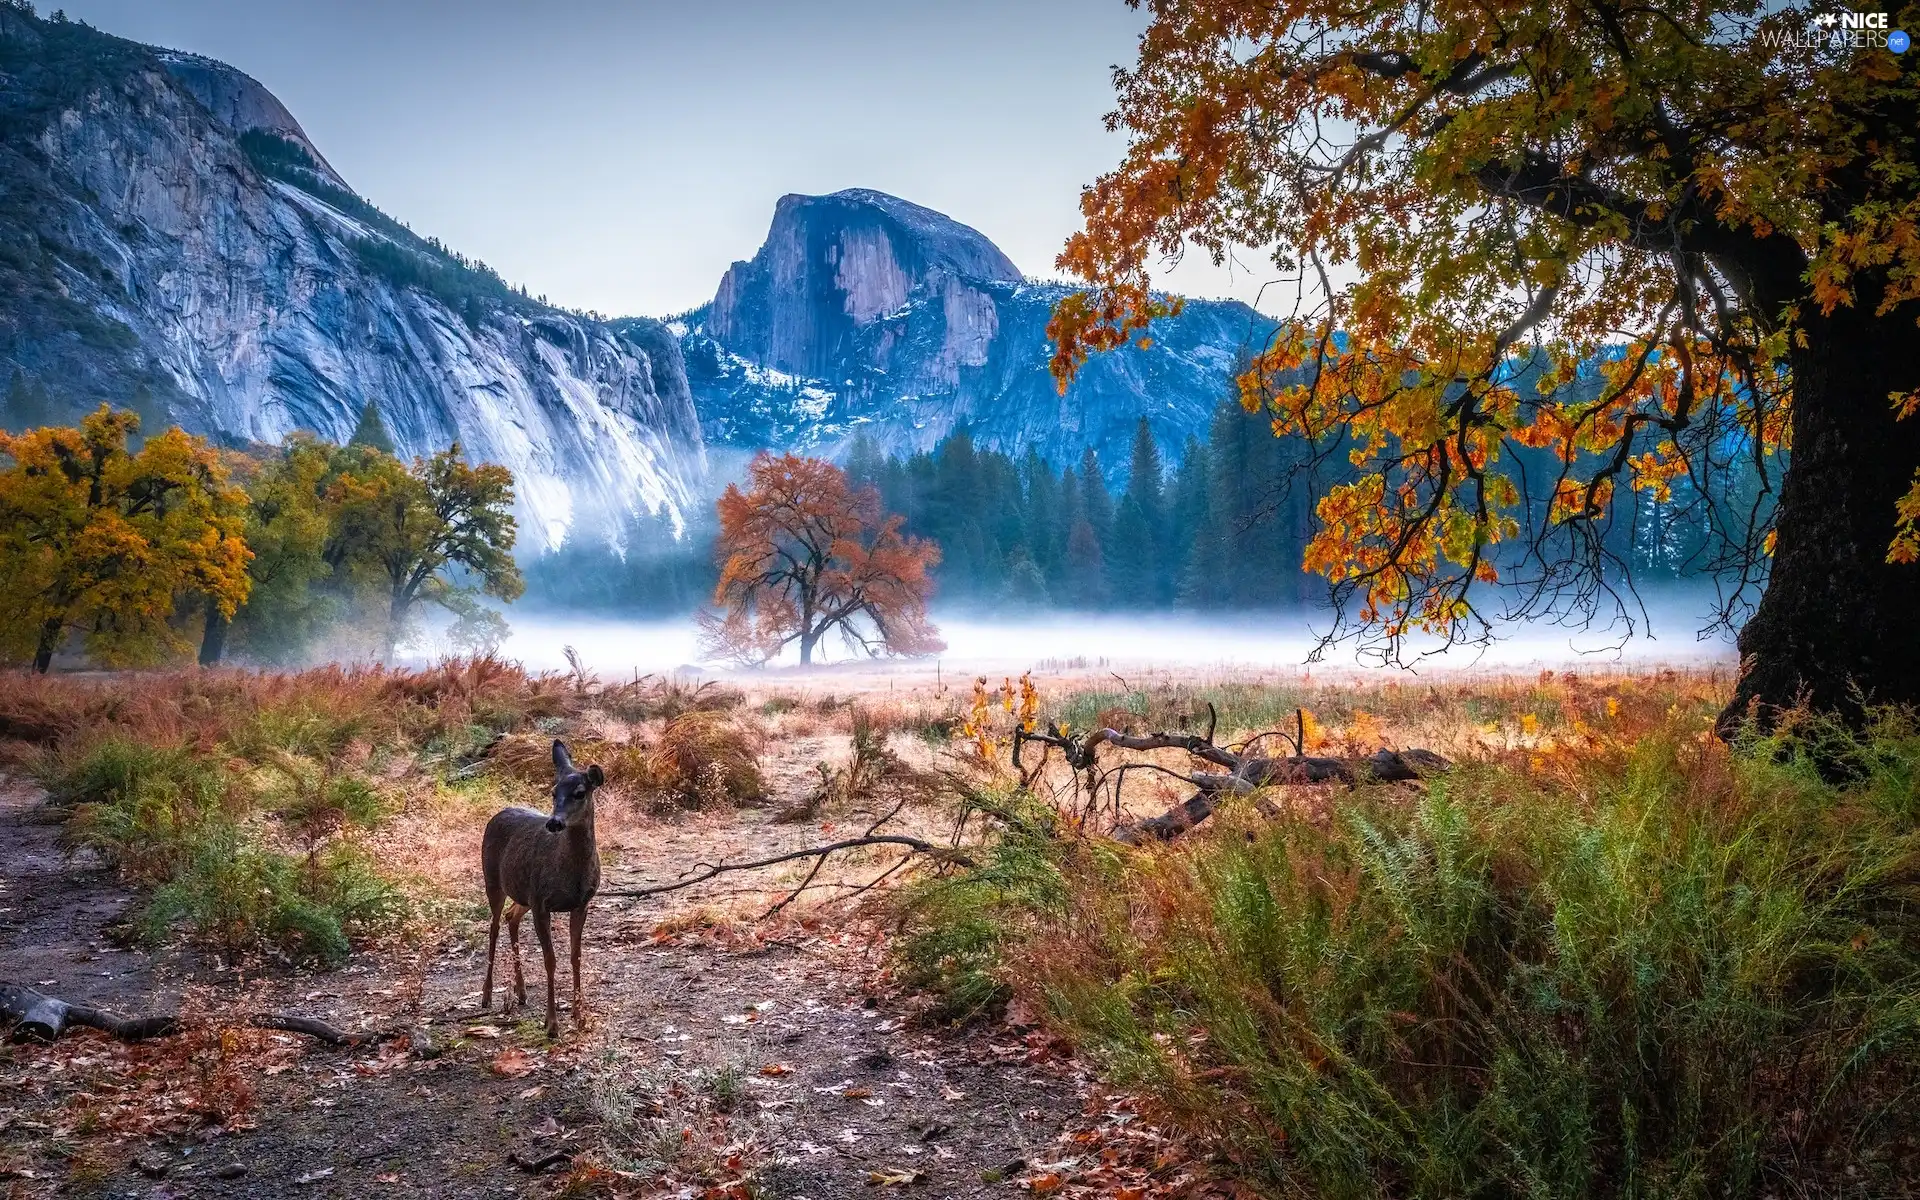 trees, California, Mountains, roe, autumn, The United States, Yosemite National Park, Lod on the beach, viewes, Fog